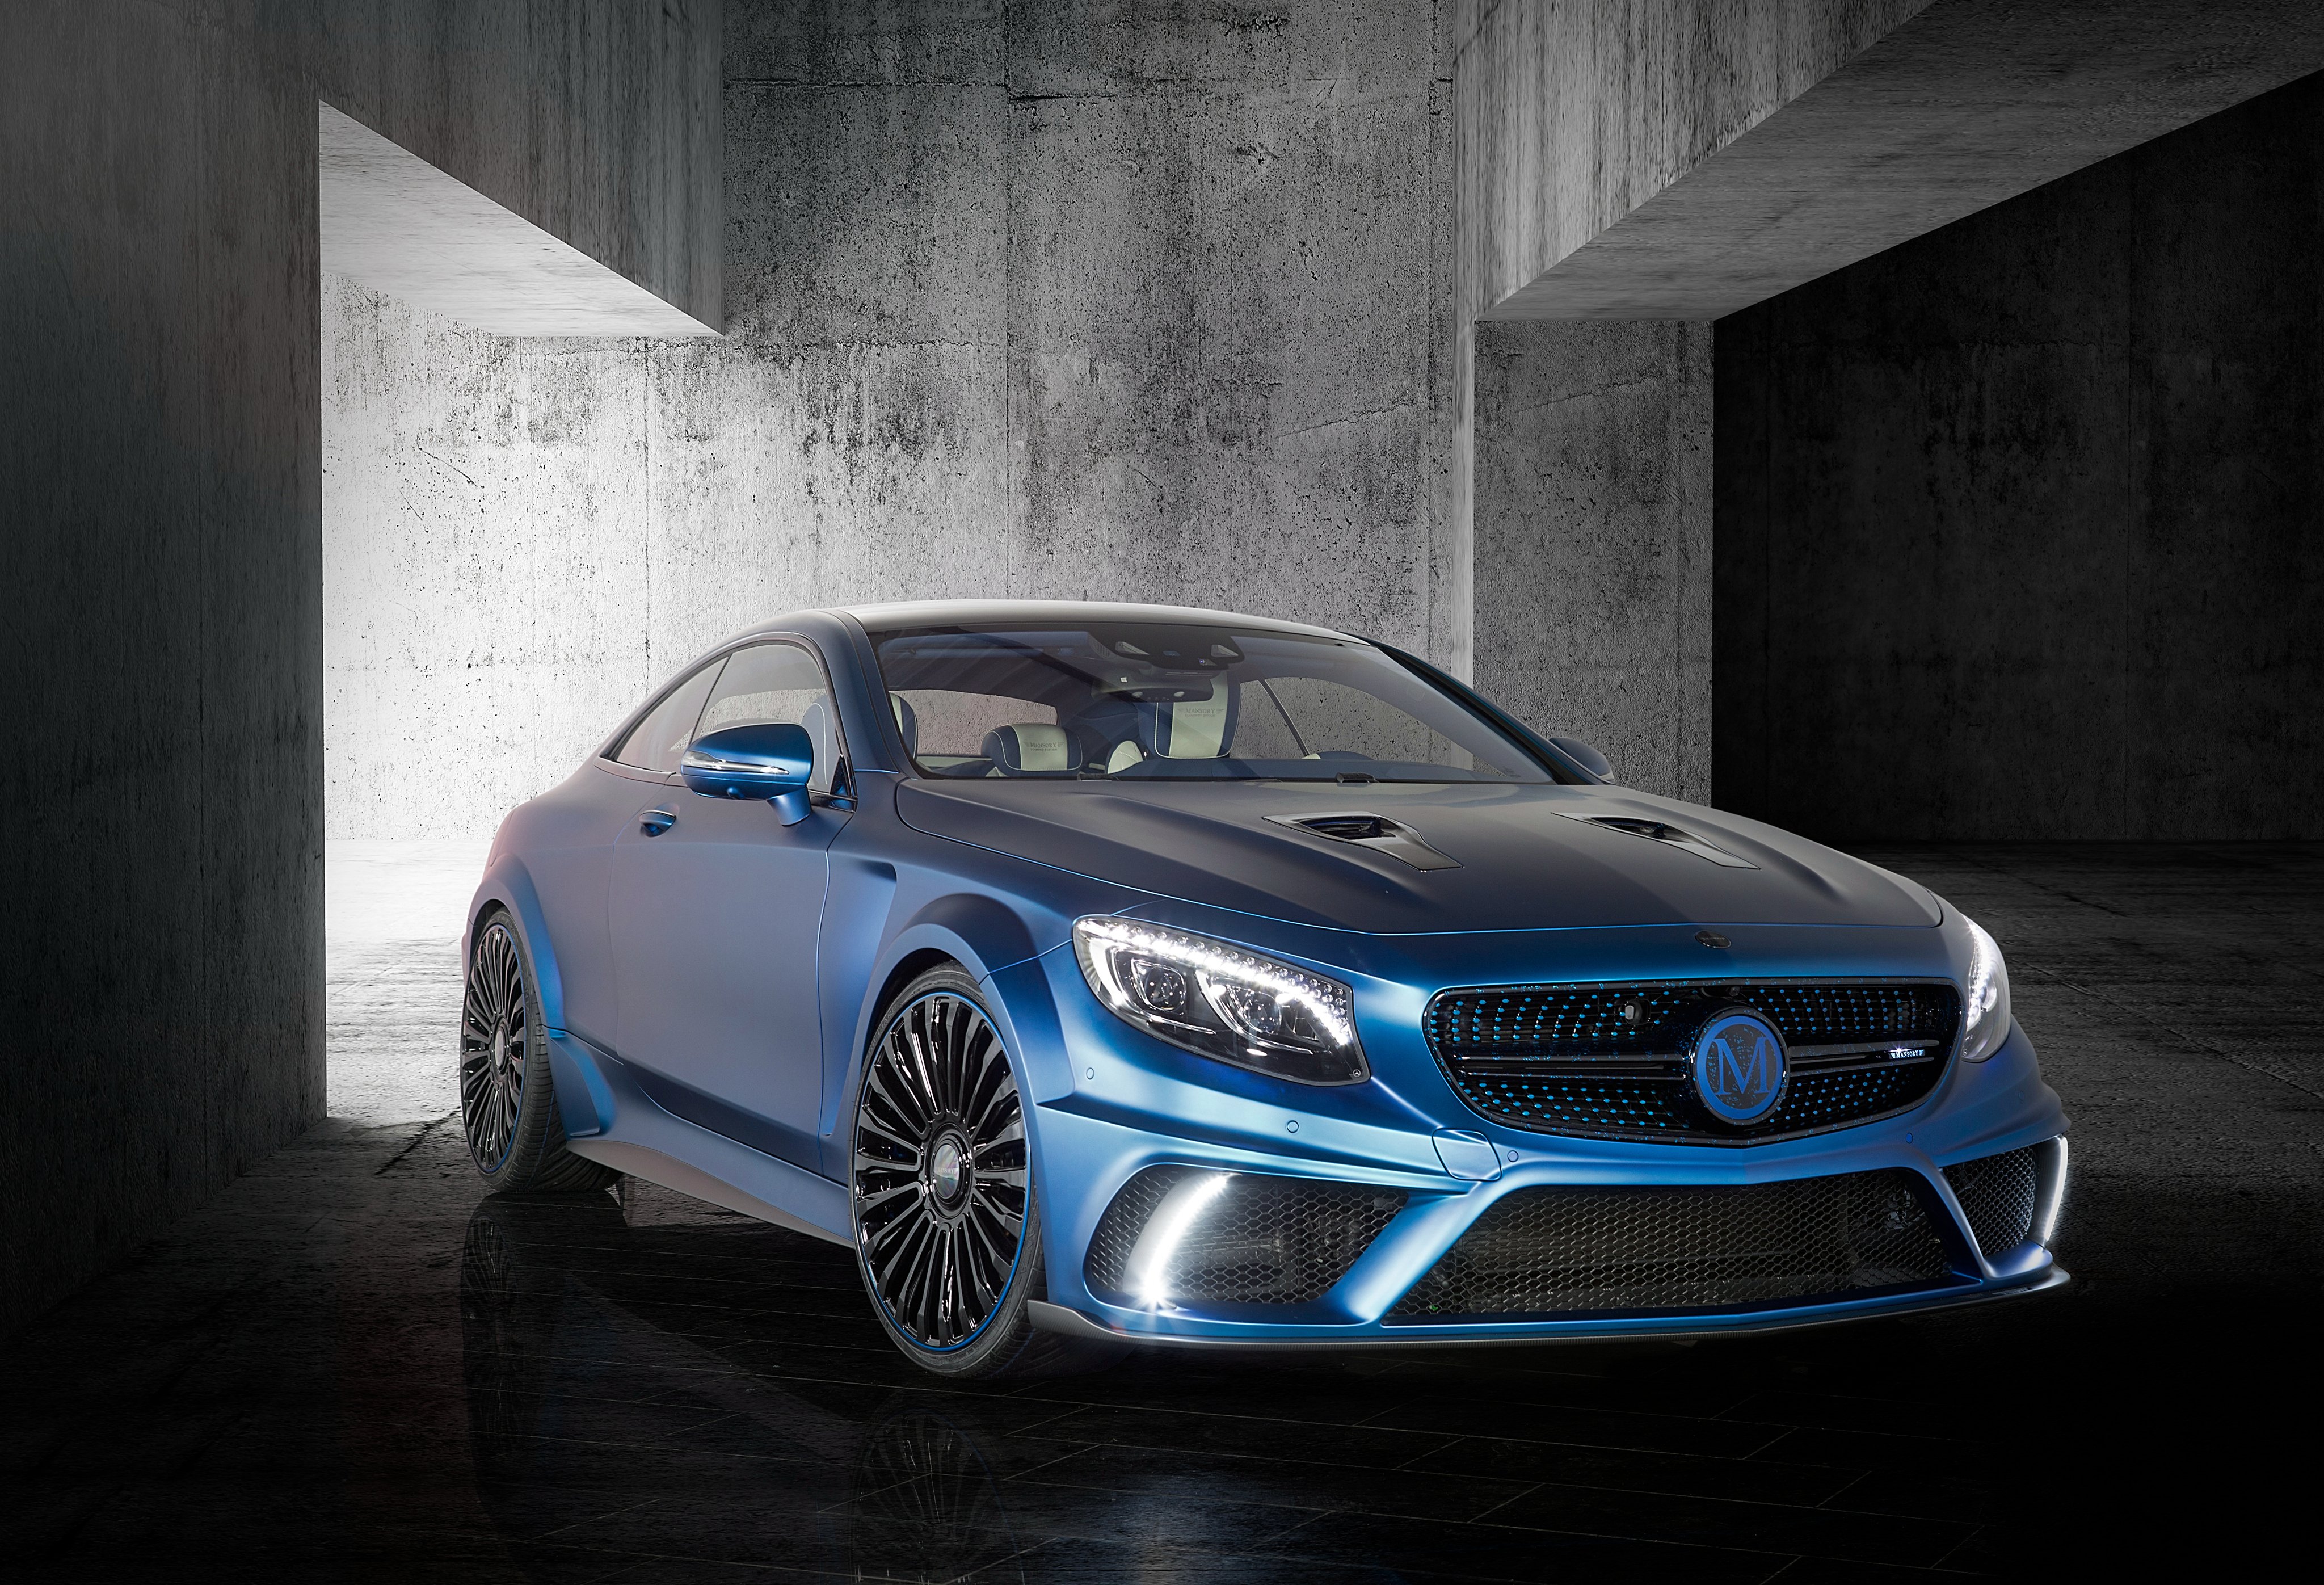 mansory, Mercedes, Benz, S, 63, Amg, Coupe, Diamond, Edition, 2015, Tuning, Cars Wallpaper